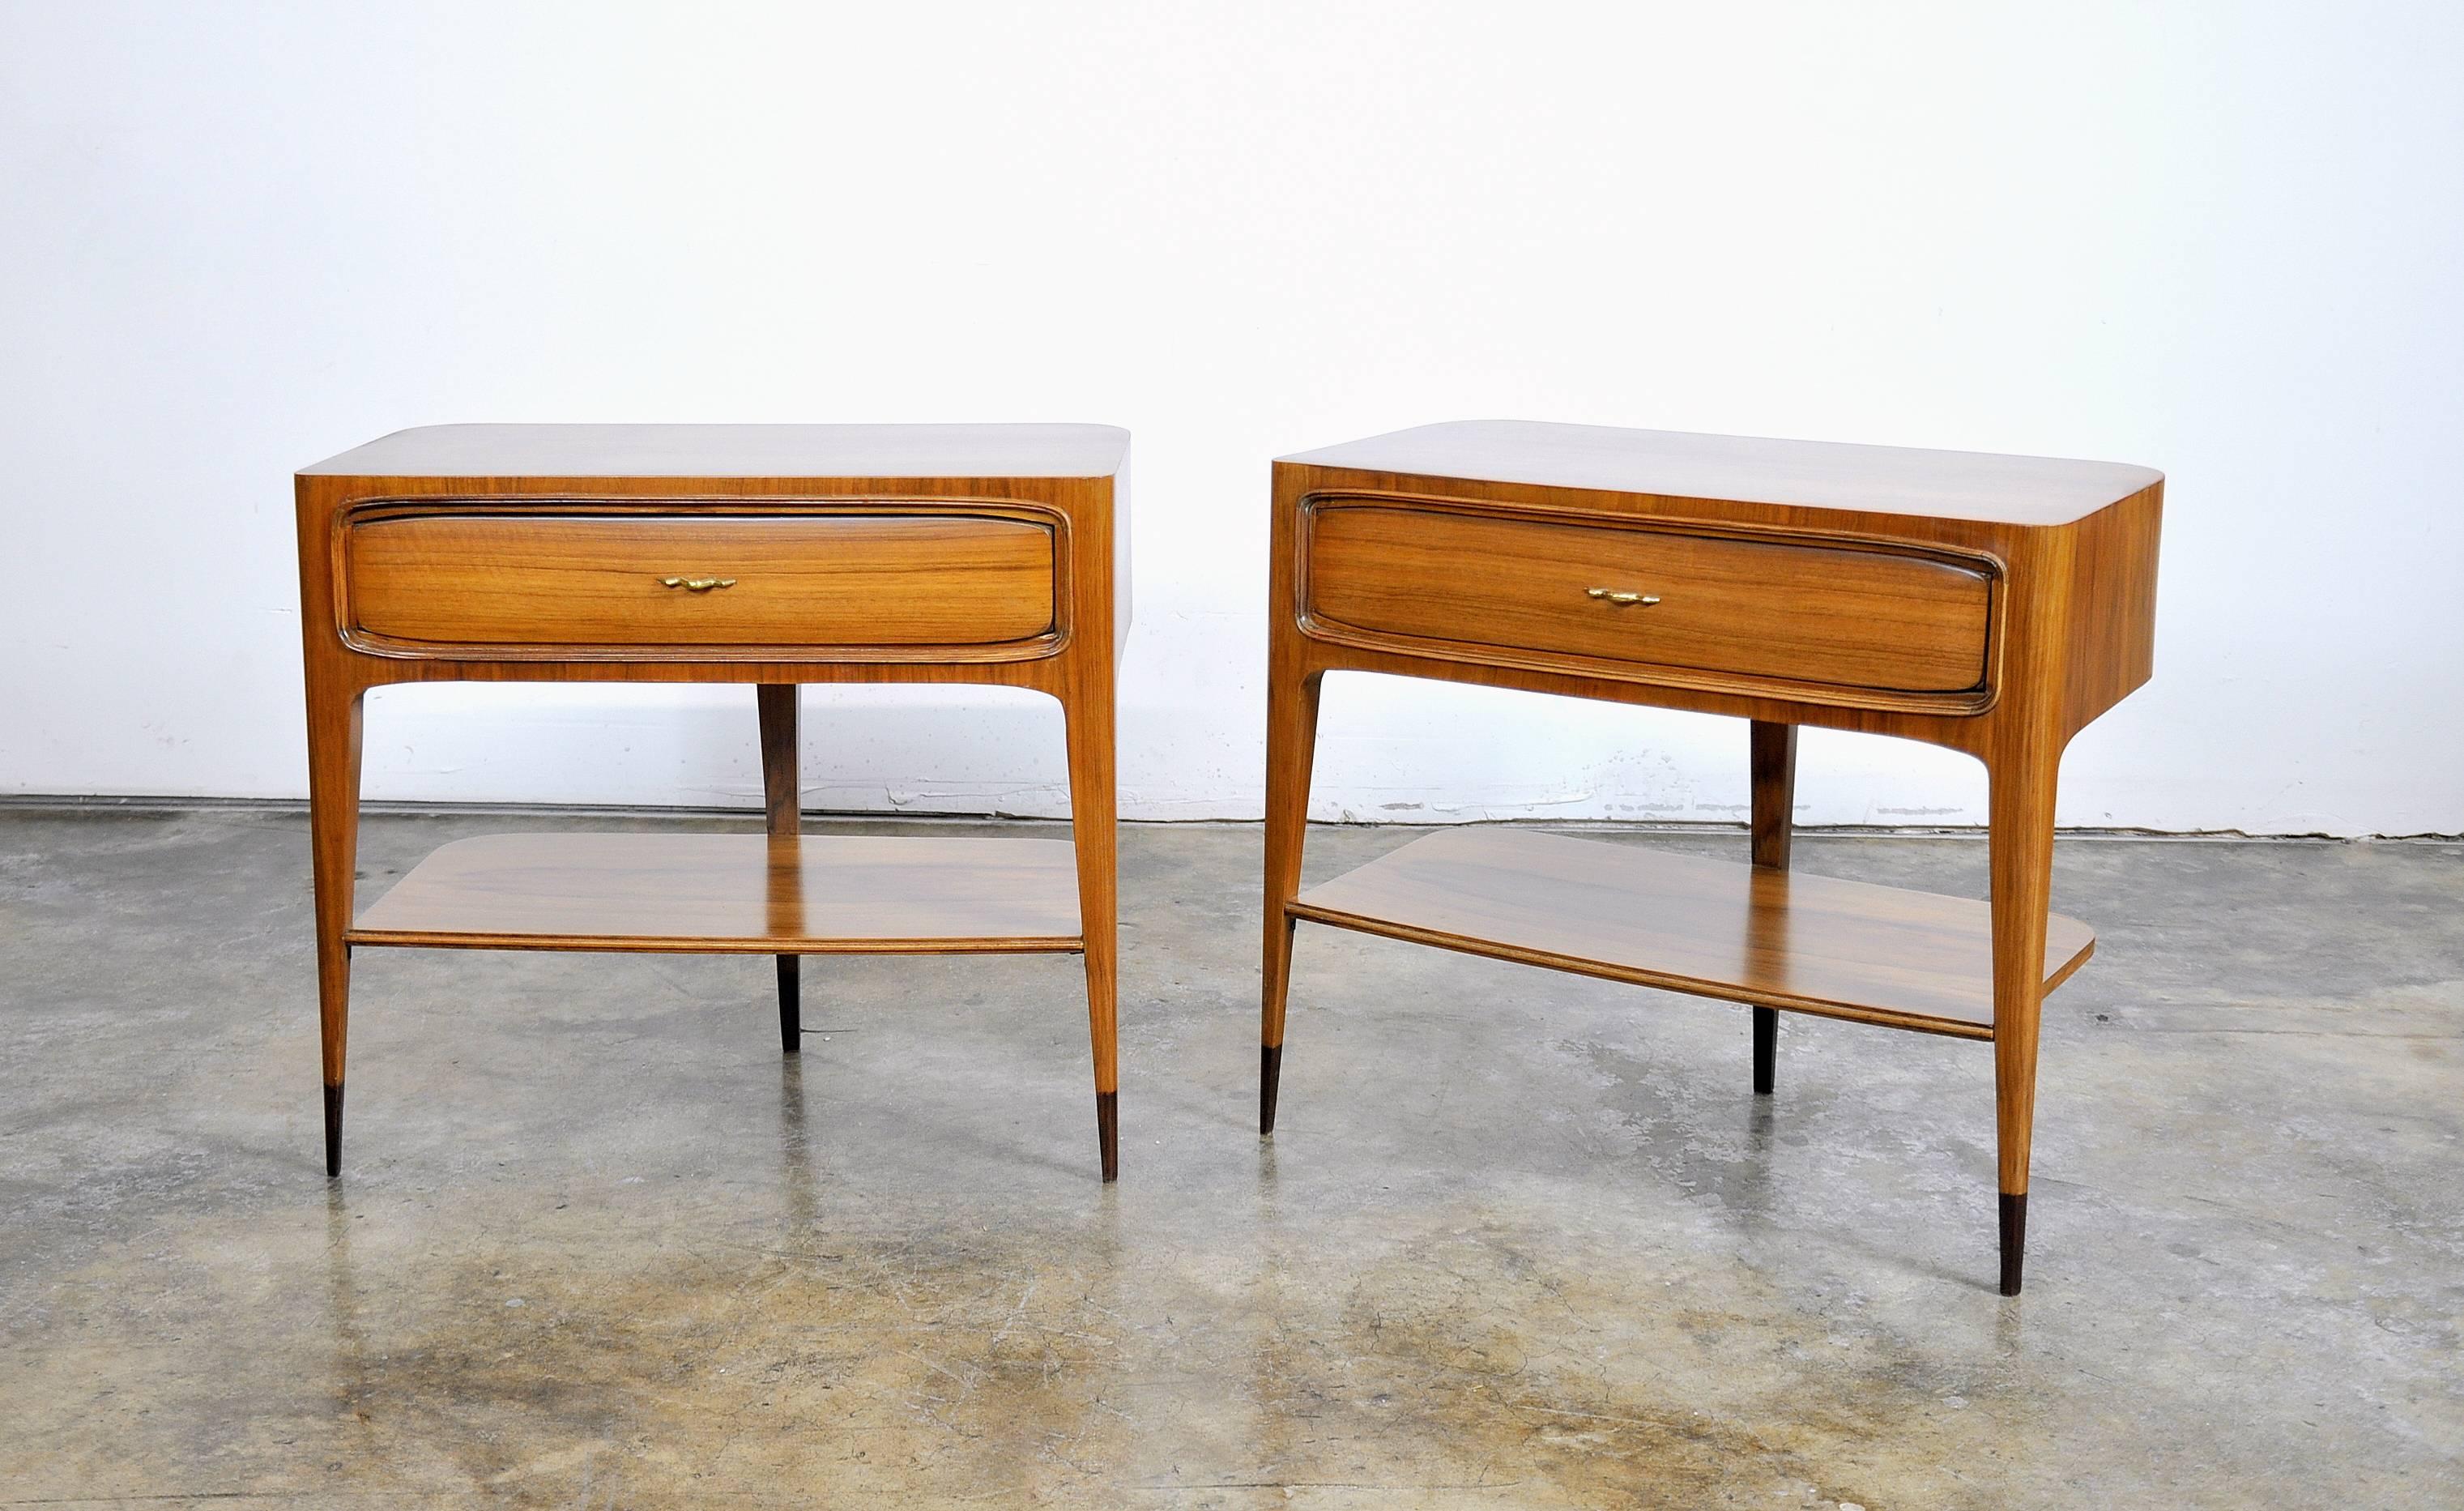 Exquisite and elegant pair of Italian Mid-Century Modern side, end or bedside tables made in Italy in the 1950s and attributed to Paolo Buffa. Professionally refinished, each demilune night stand features a curved back, solid brass zig zag pulls and